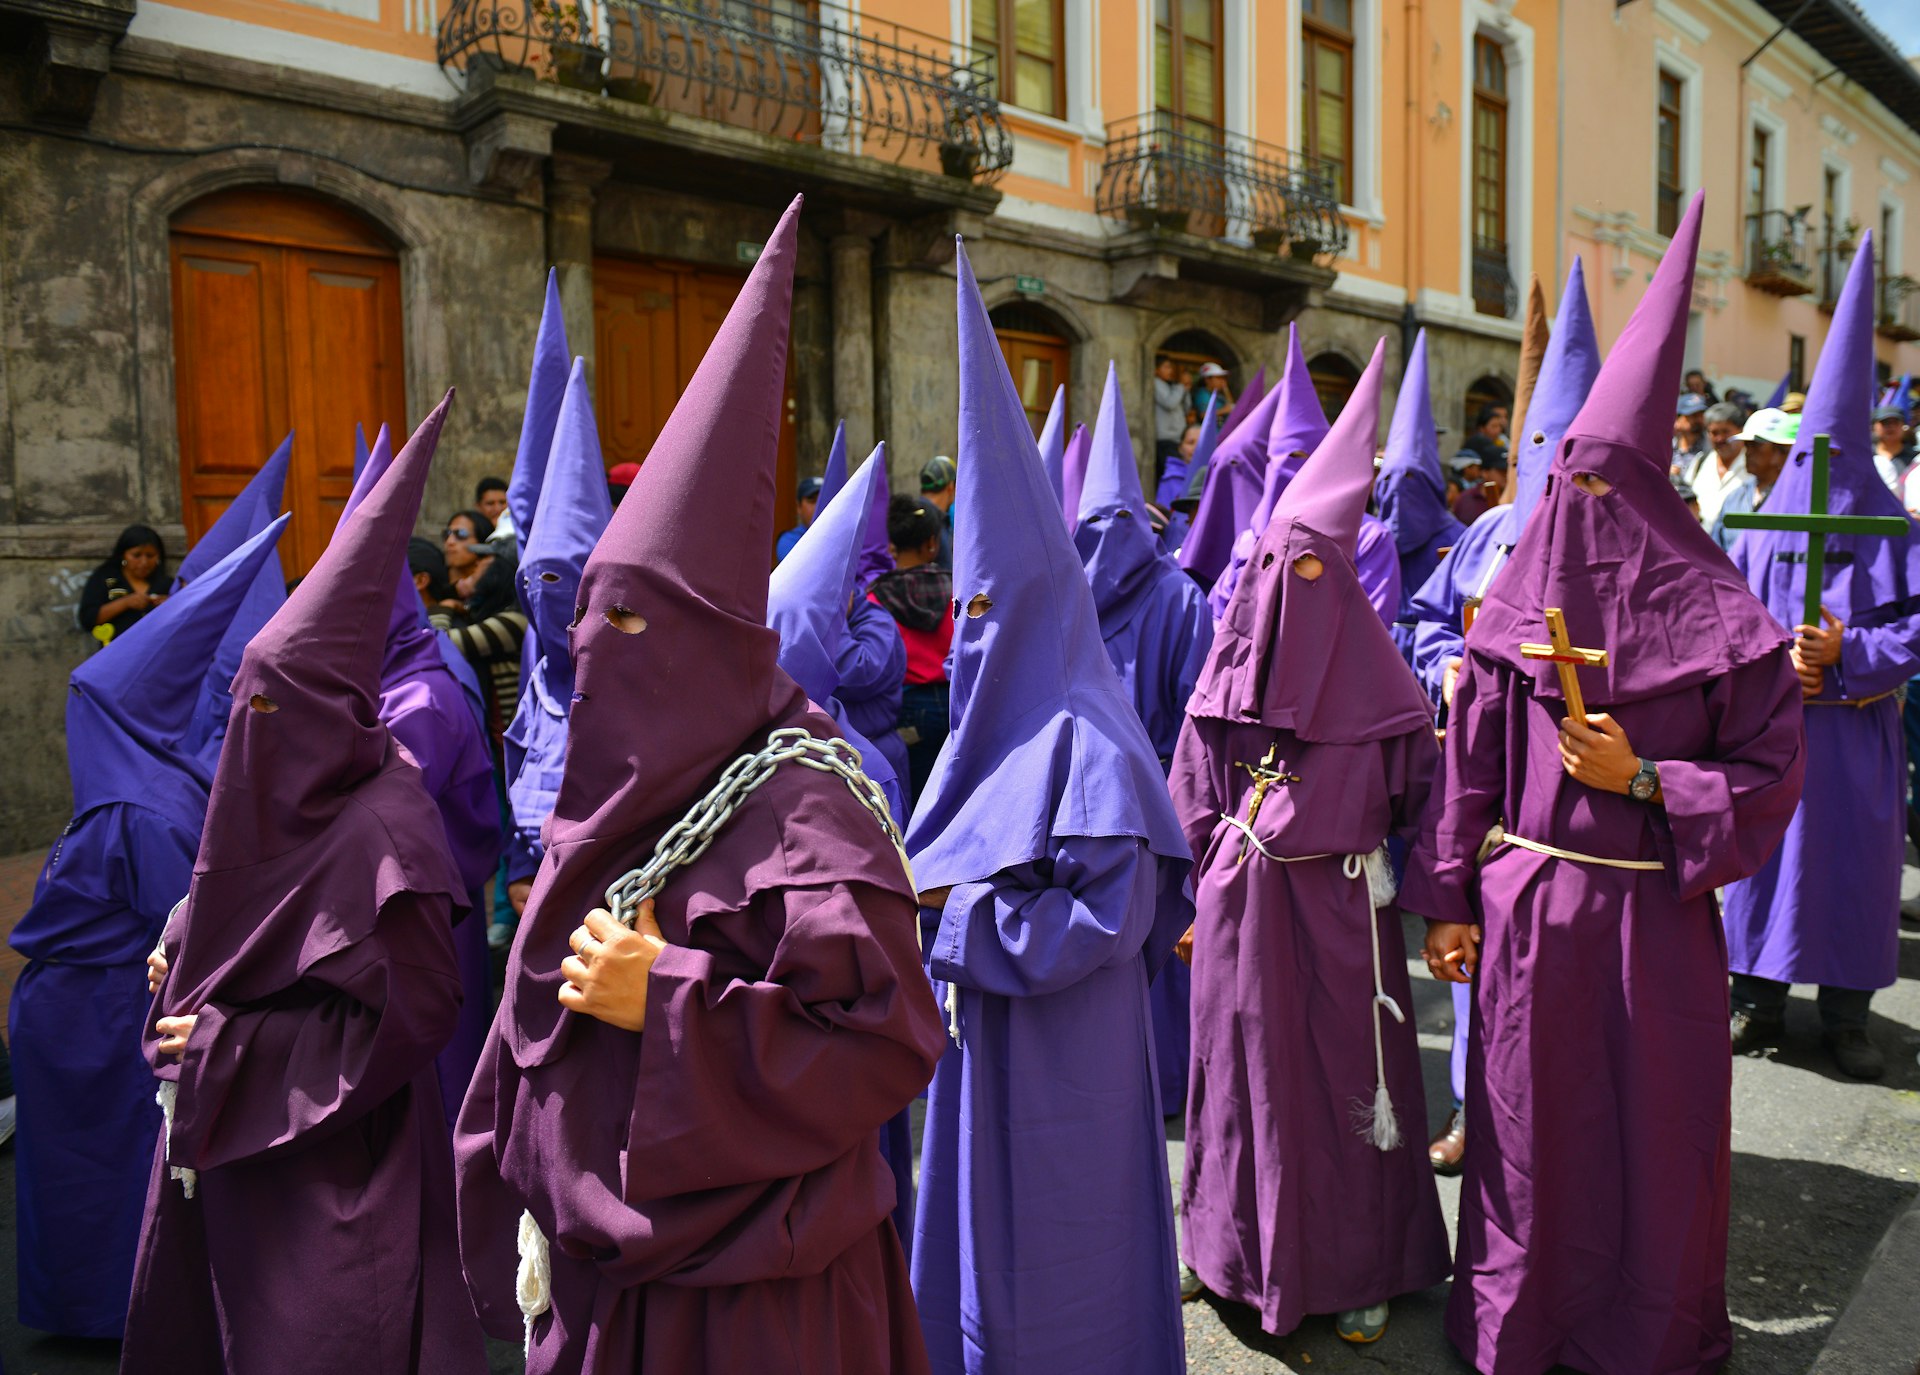 Celebrants in hooded robes parade in Quito for Easter